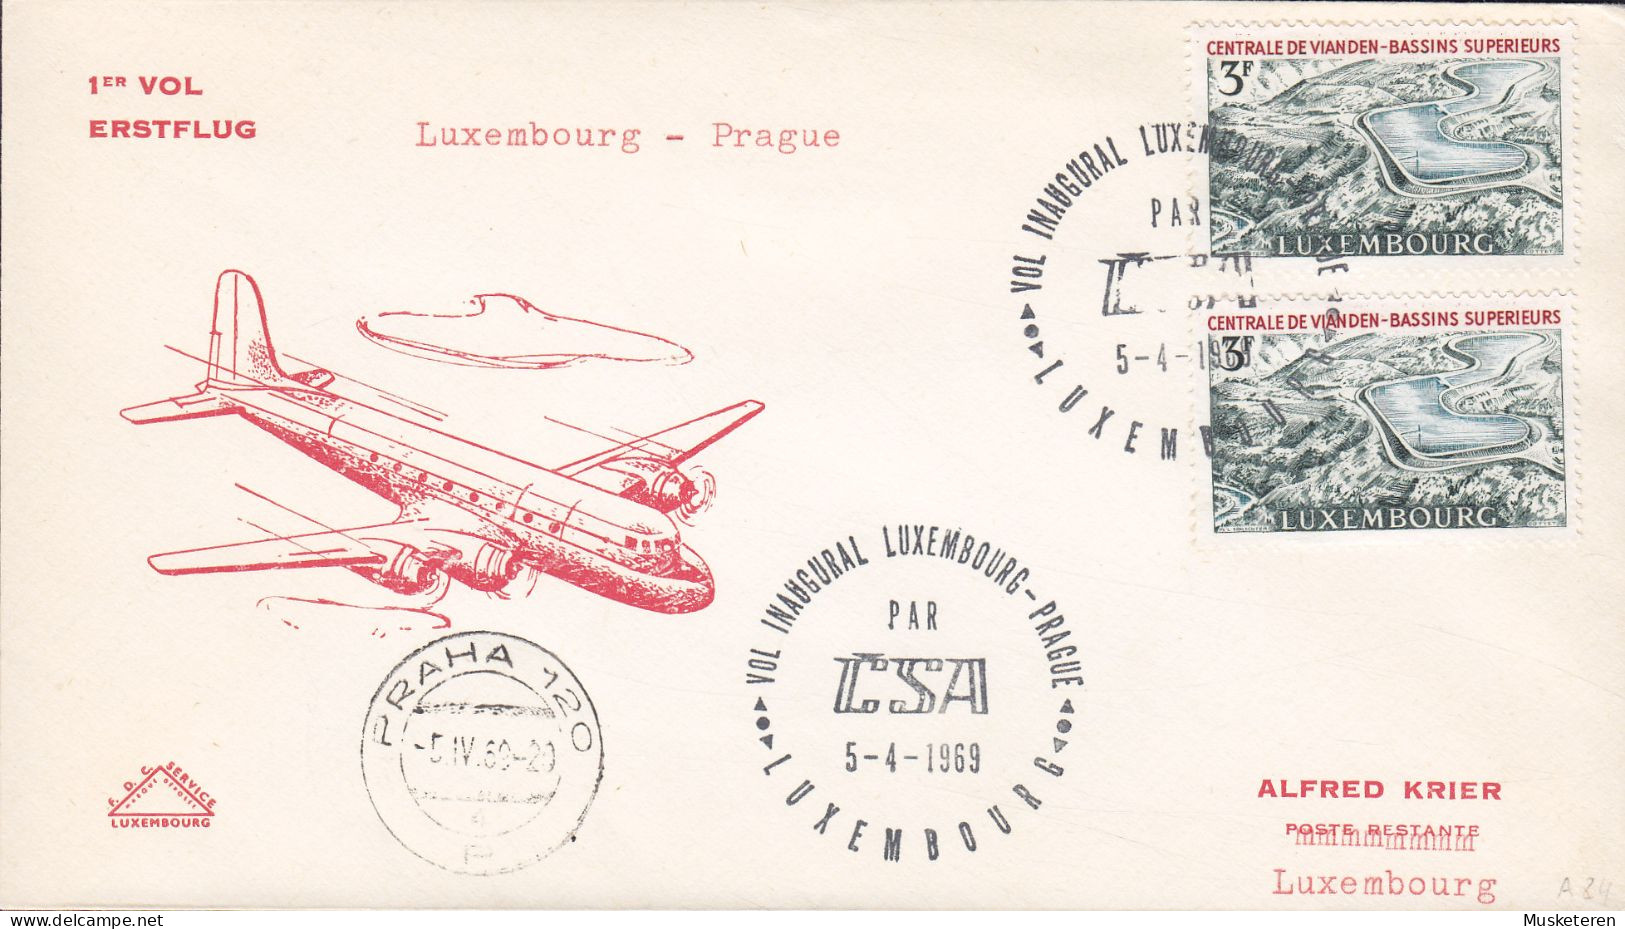 Luxembourg Vol INAUGURAL Erstflug First Flight LUXEMBOURG - PRAGUE 1969 Cover Brief Lettre PRAHA (Arr.) - Covers & Documents